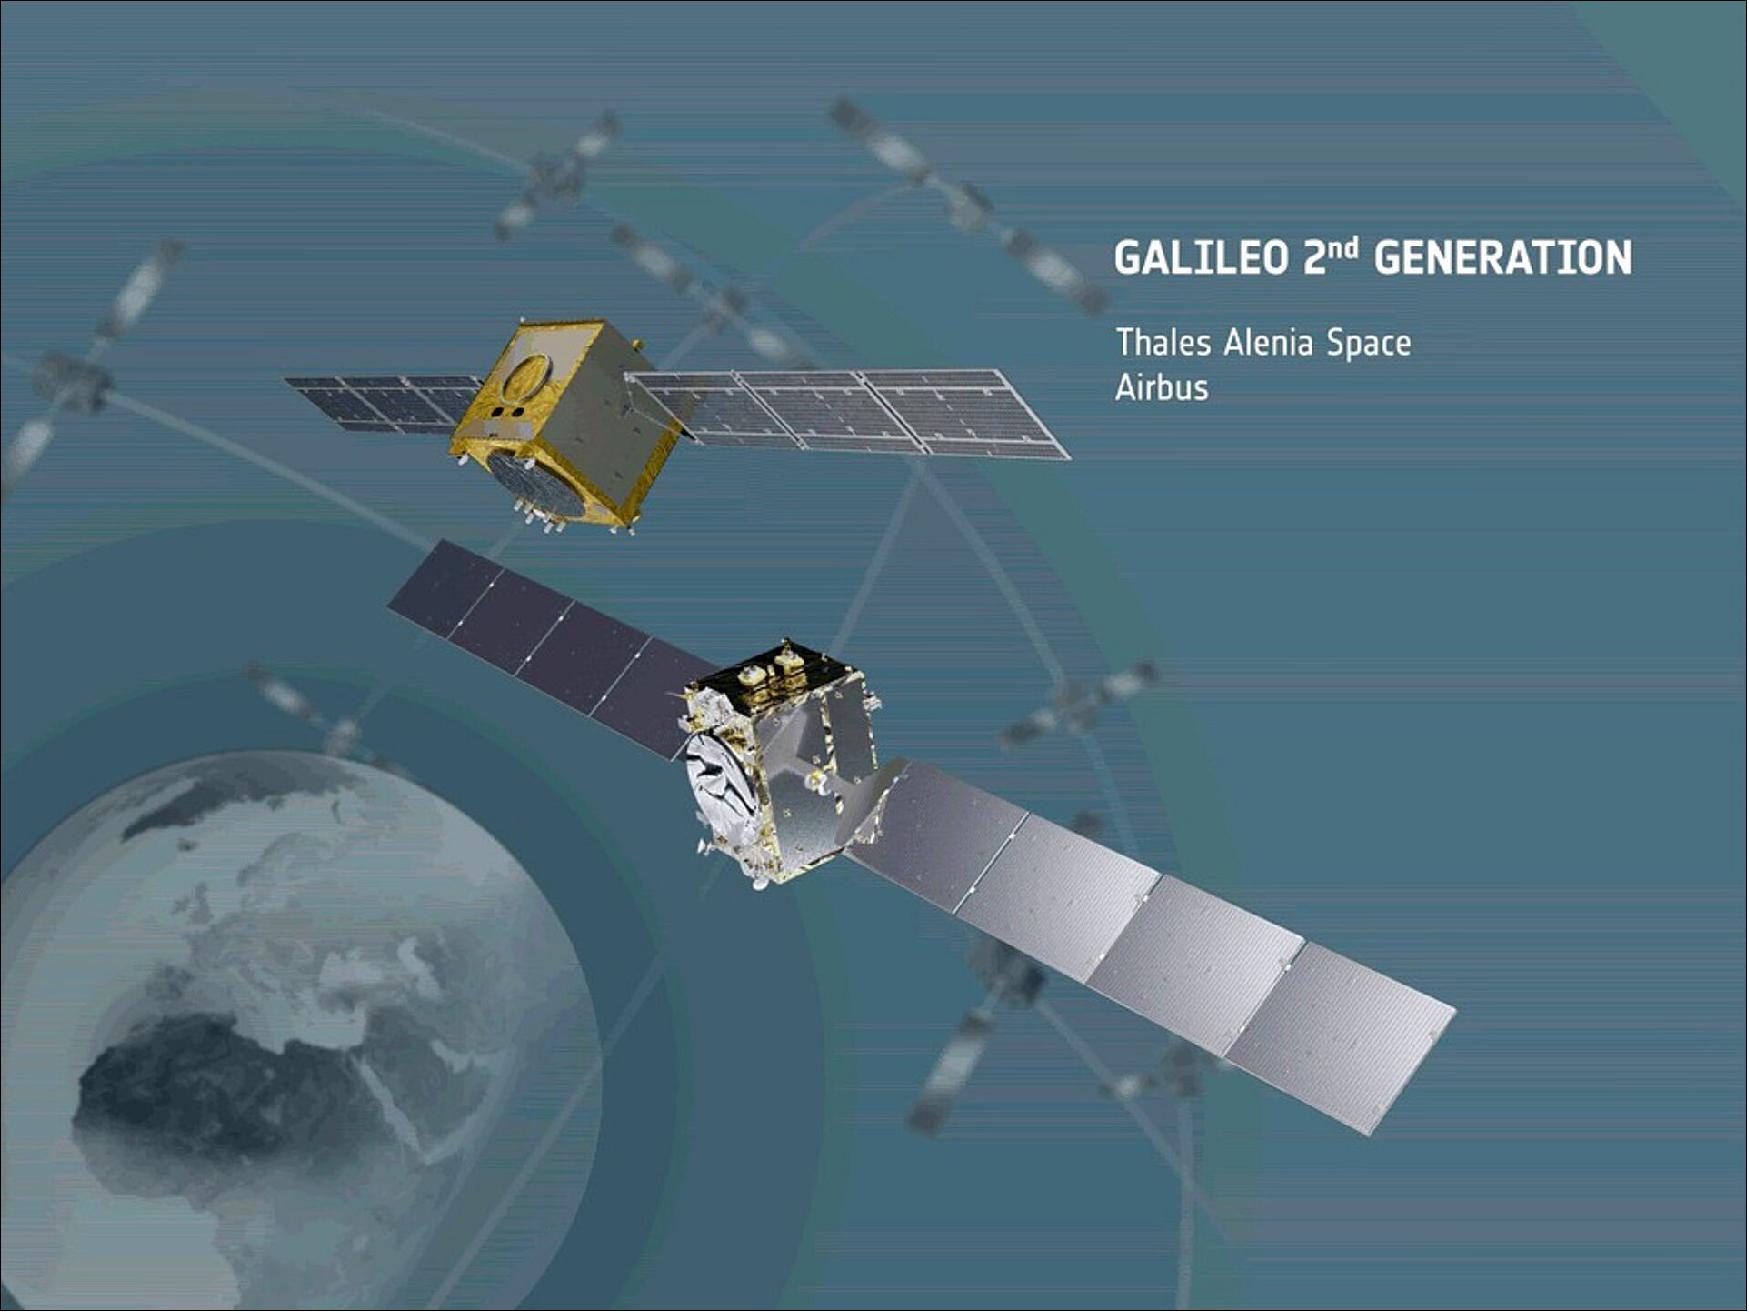 Figure 14: Galileo Second Generation. Galileo is Europe's civil global satellite navigation constellation, currently the world's most precise satnav system, offering meter-scale accuracy to more than 2 billion users around the globe. With improved accuracy, the new generation should be able to offer decimeter-scale precision positioning to all (image credit: ESA)